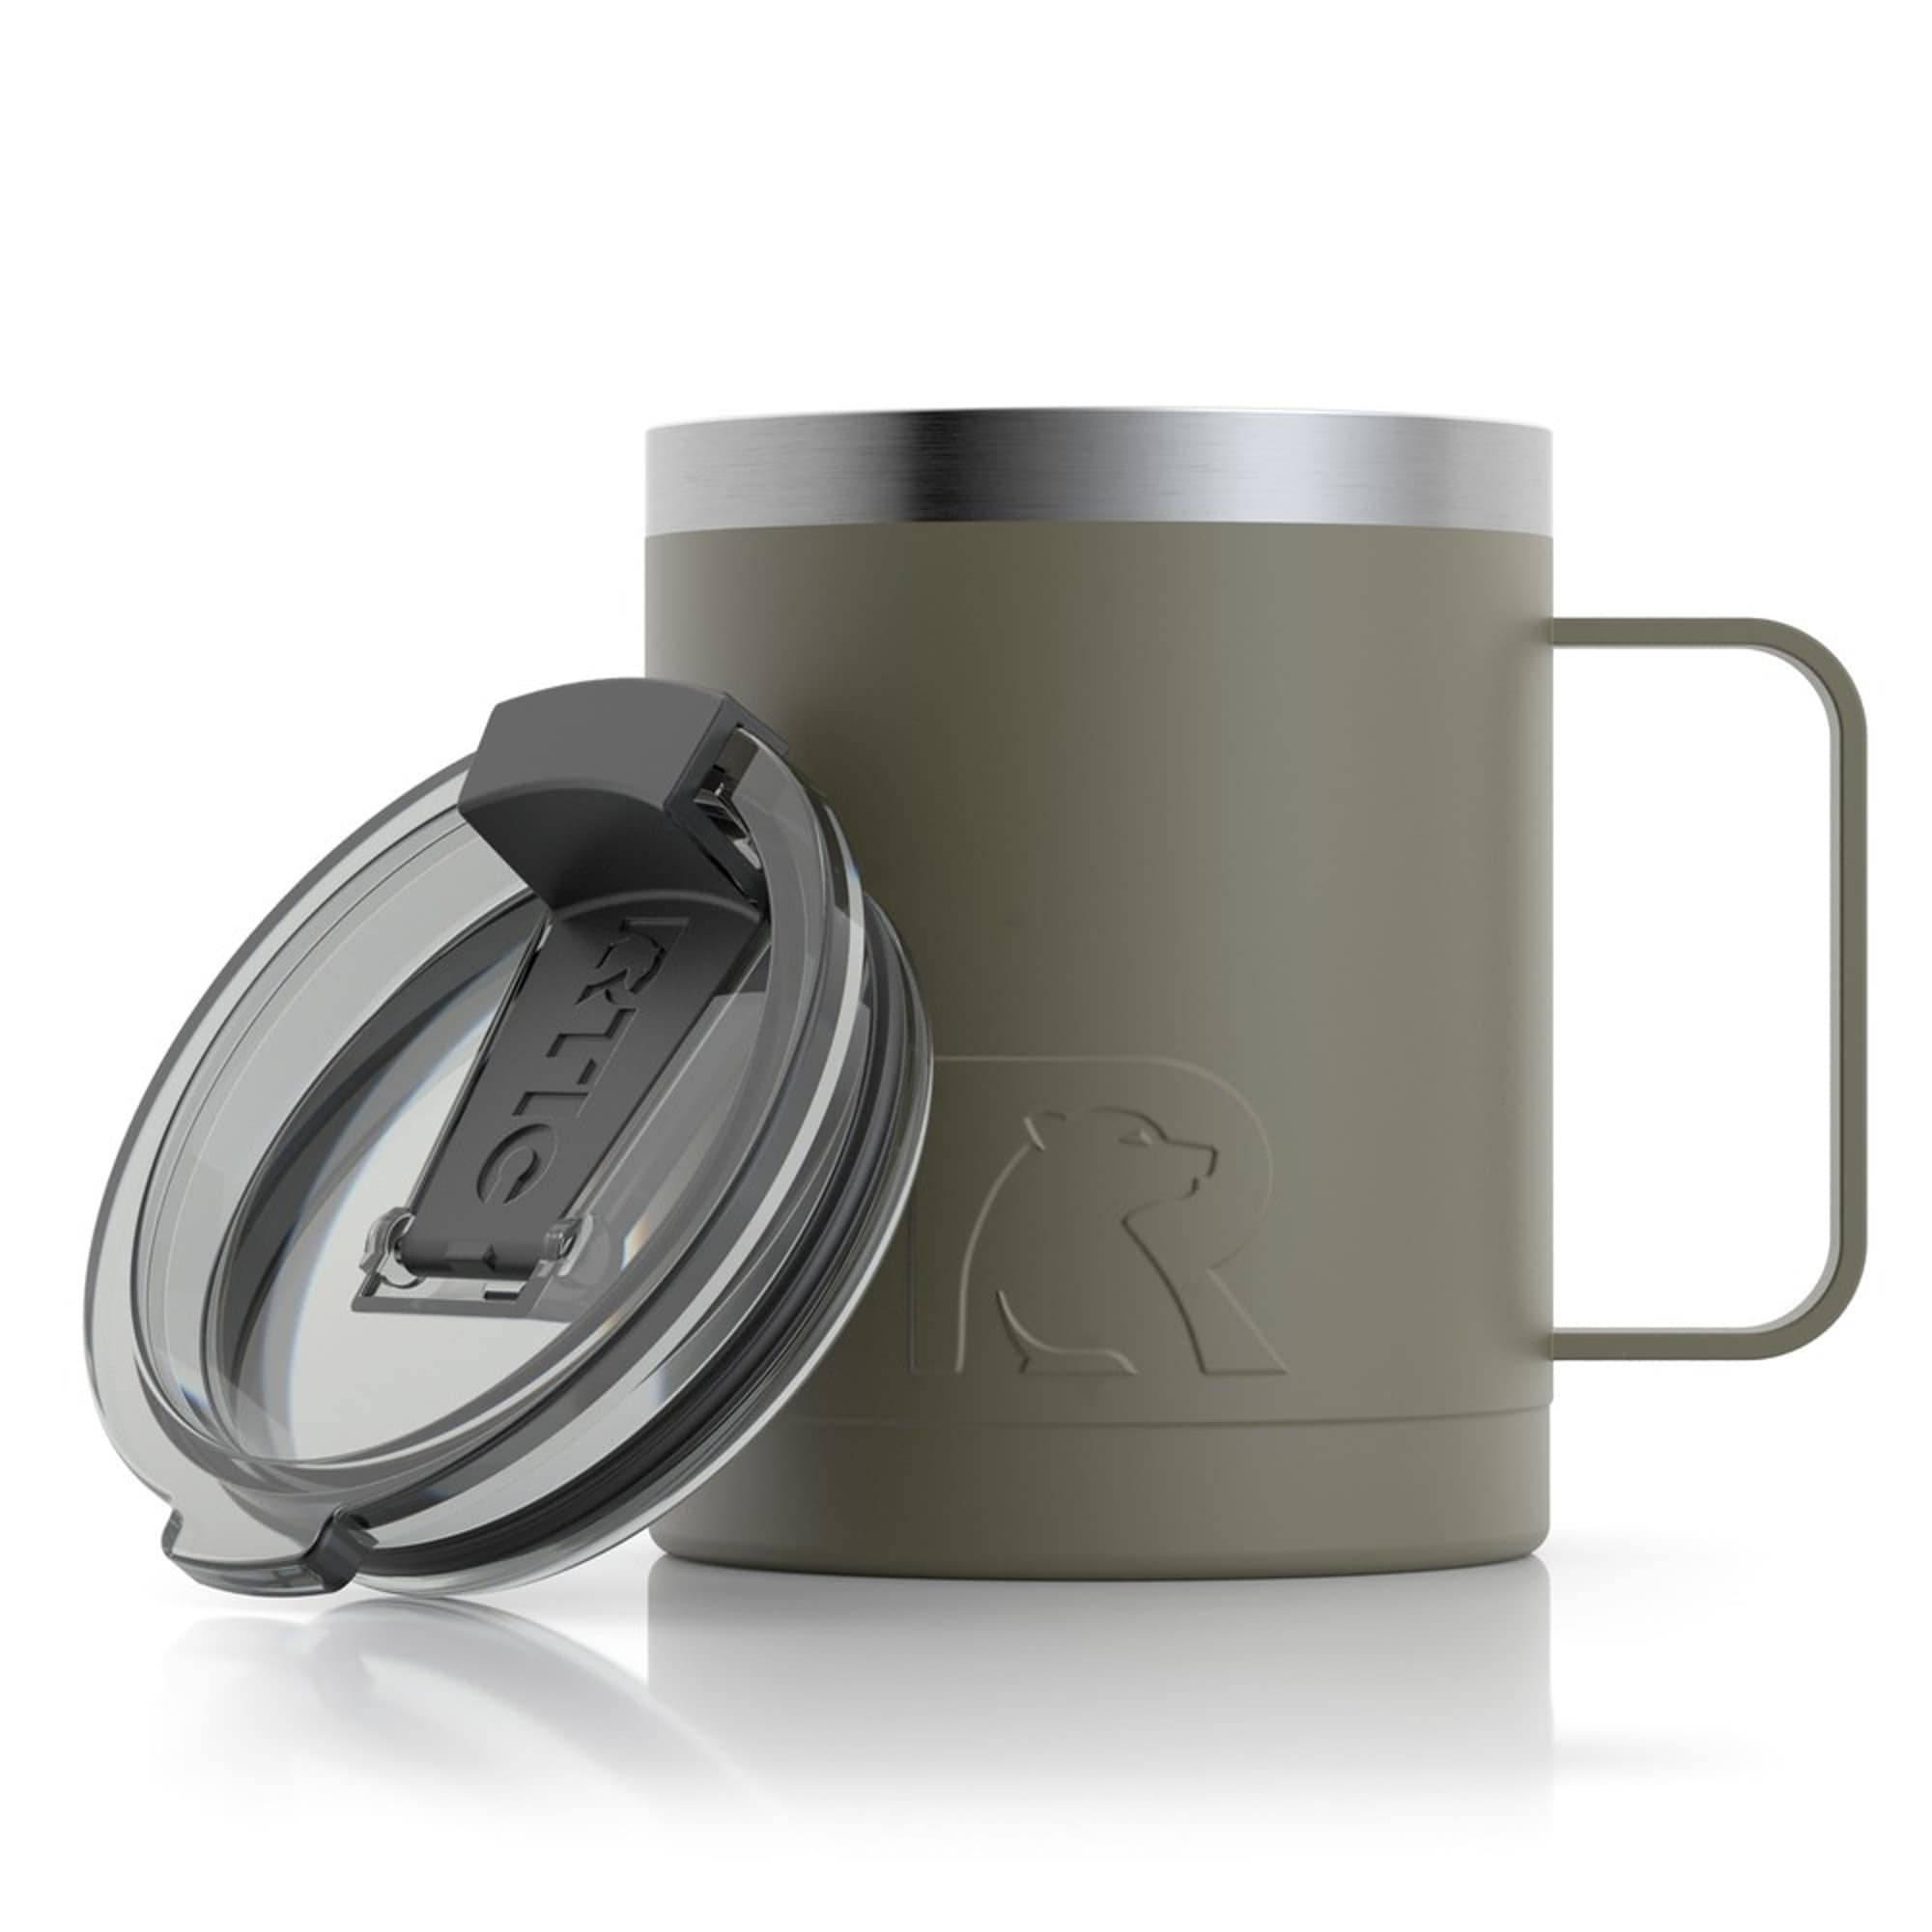 RTIC Coffee Mugs - Stainless Steel, Insulated, Reusable